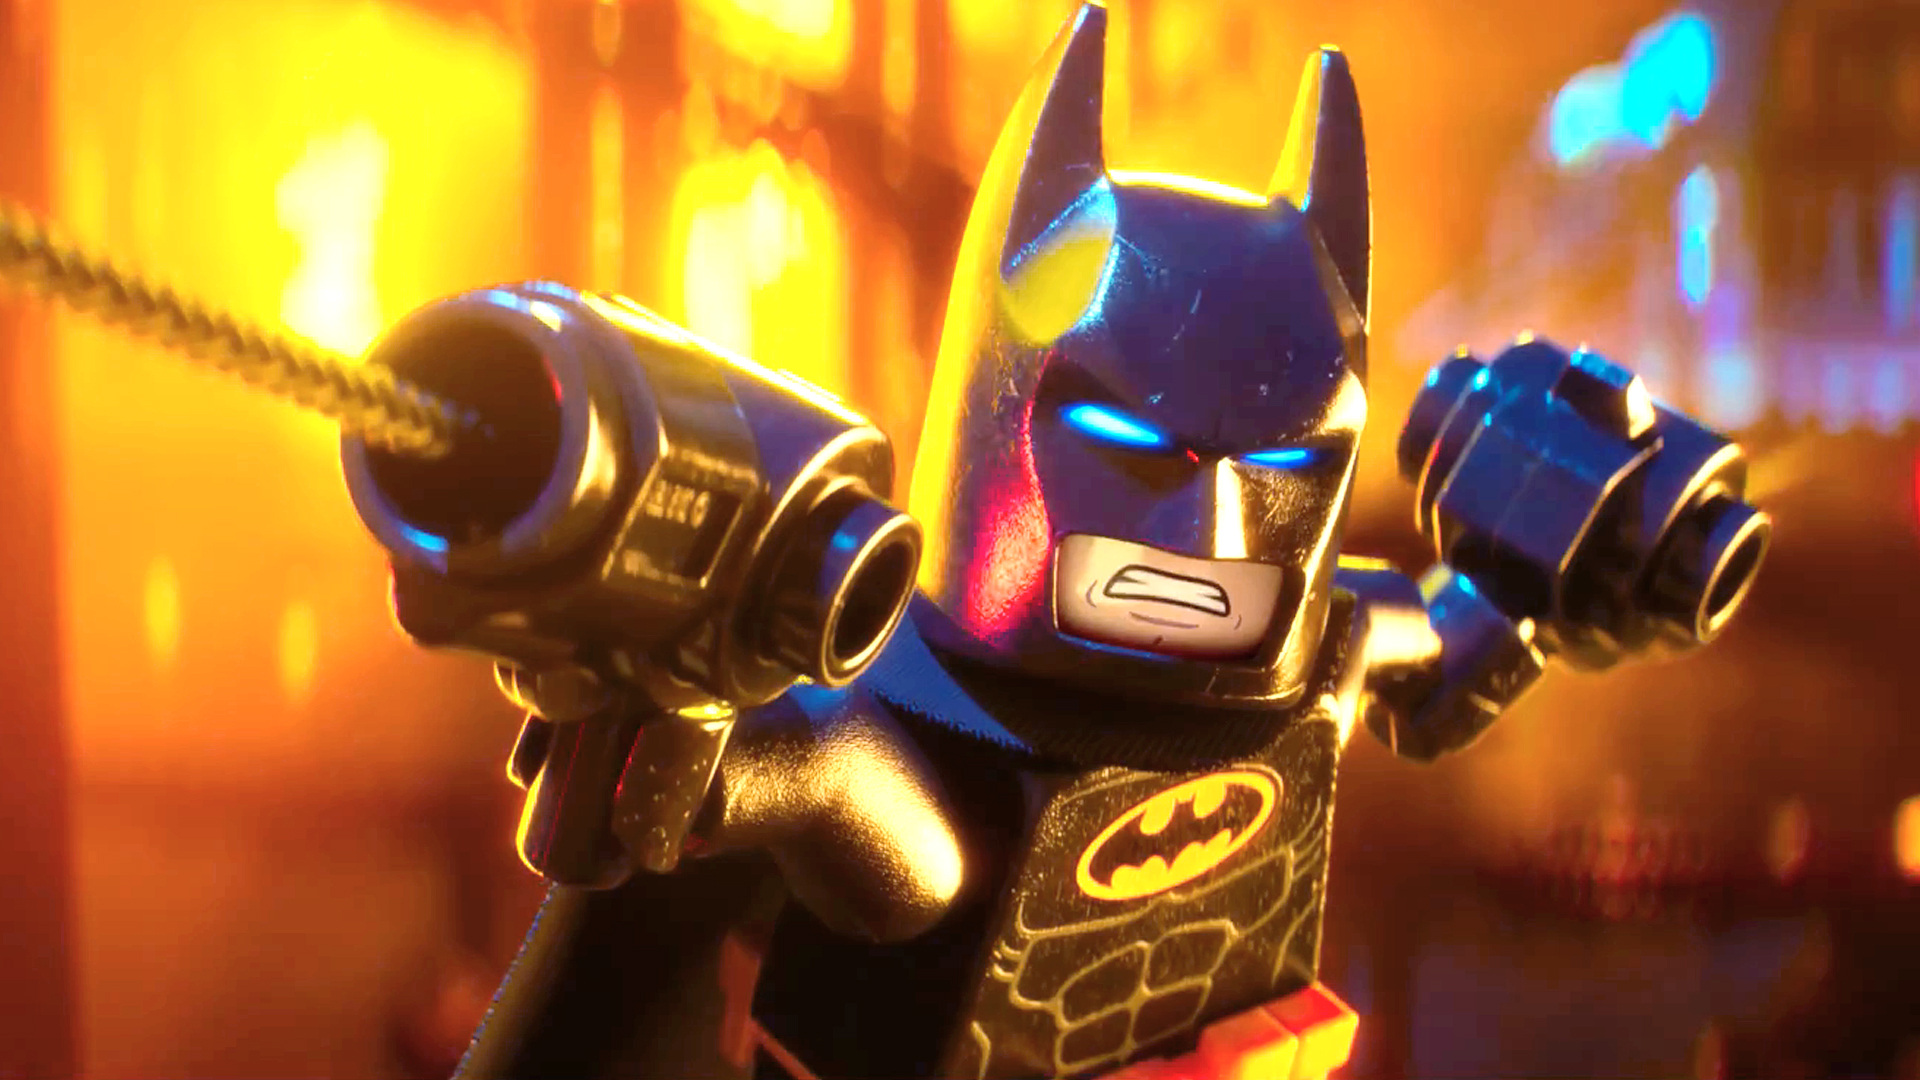 HQ The Lego Batman Movie Wallpapers | File 1127.78Kb